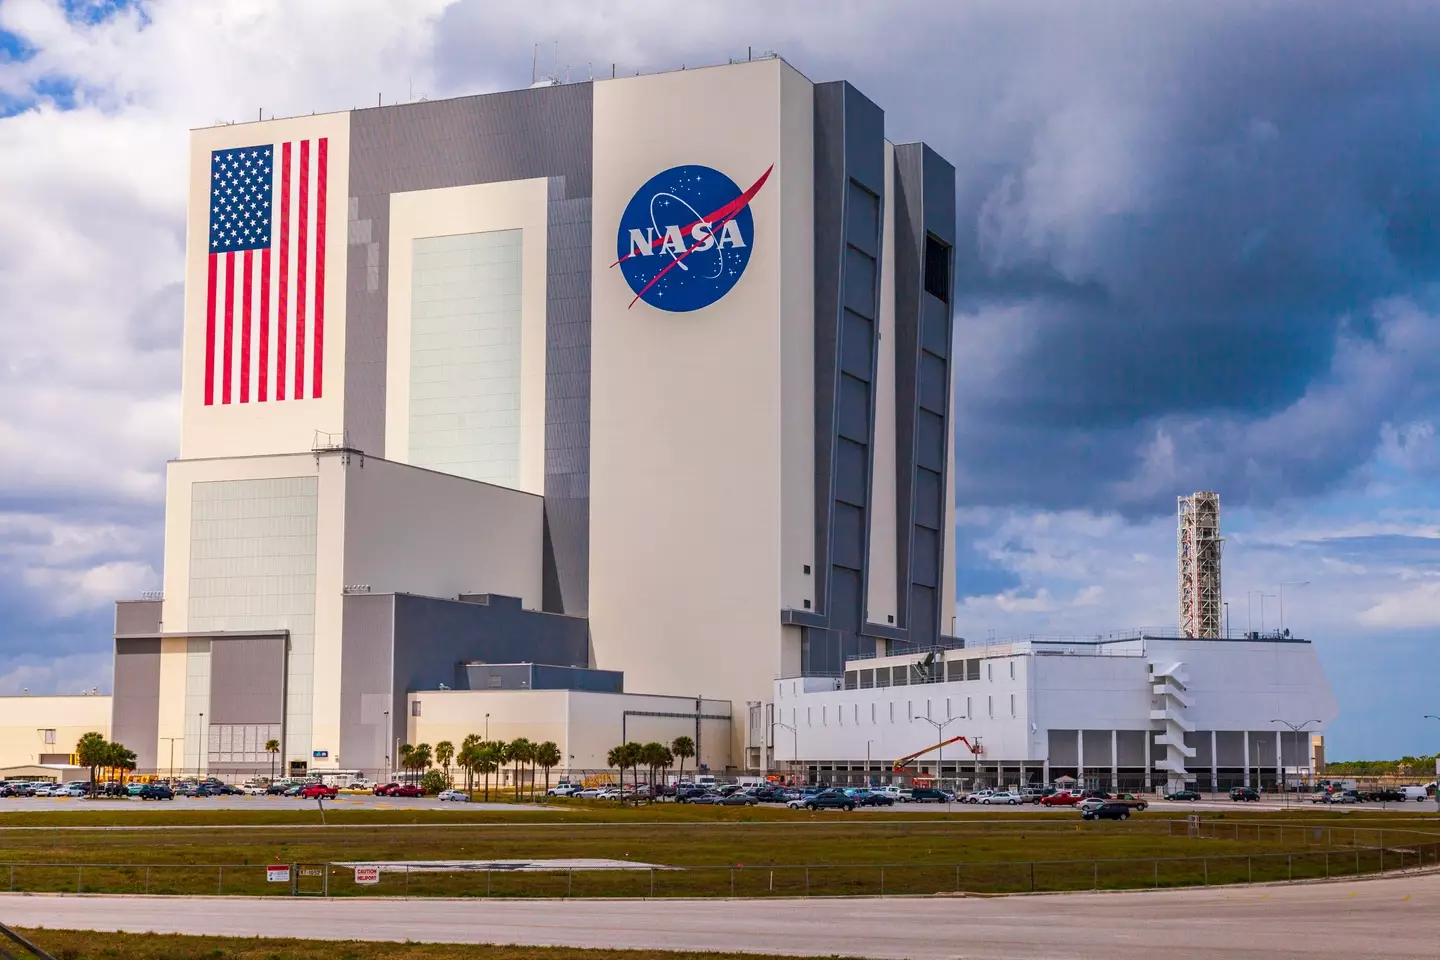 Residents near Cape Canaveral were shocked by the loud noise.